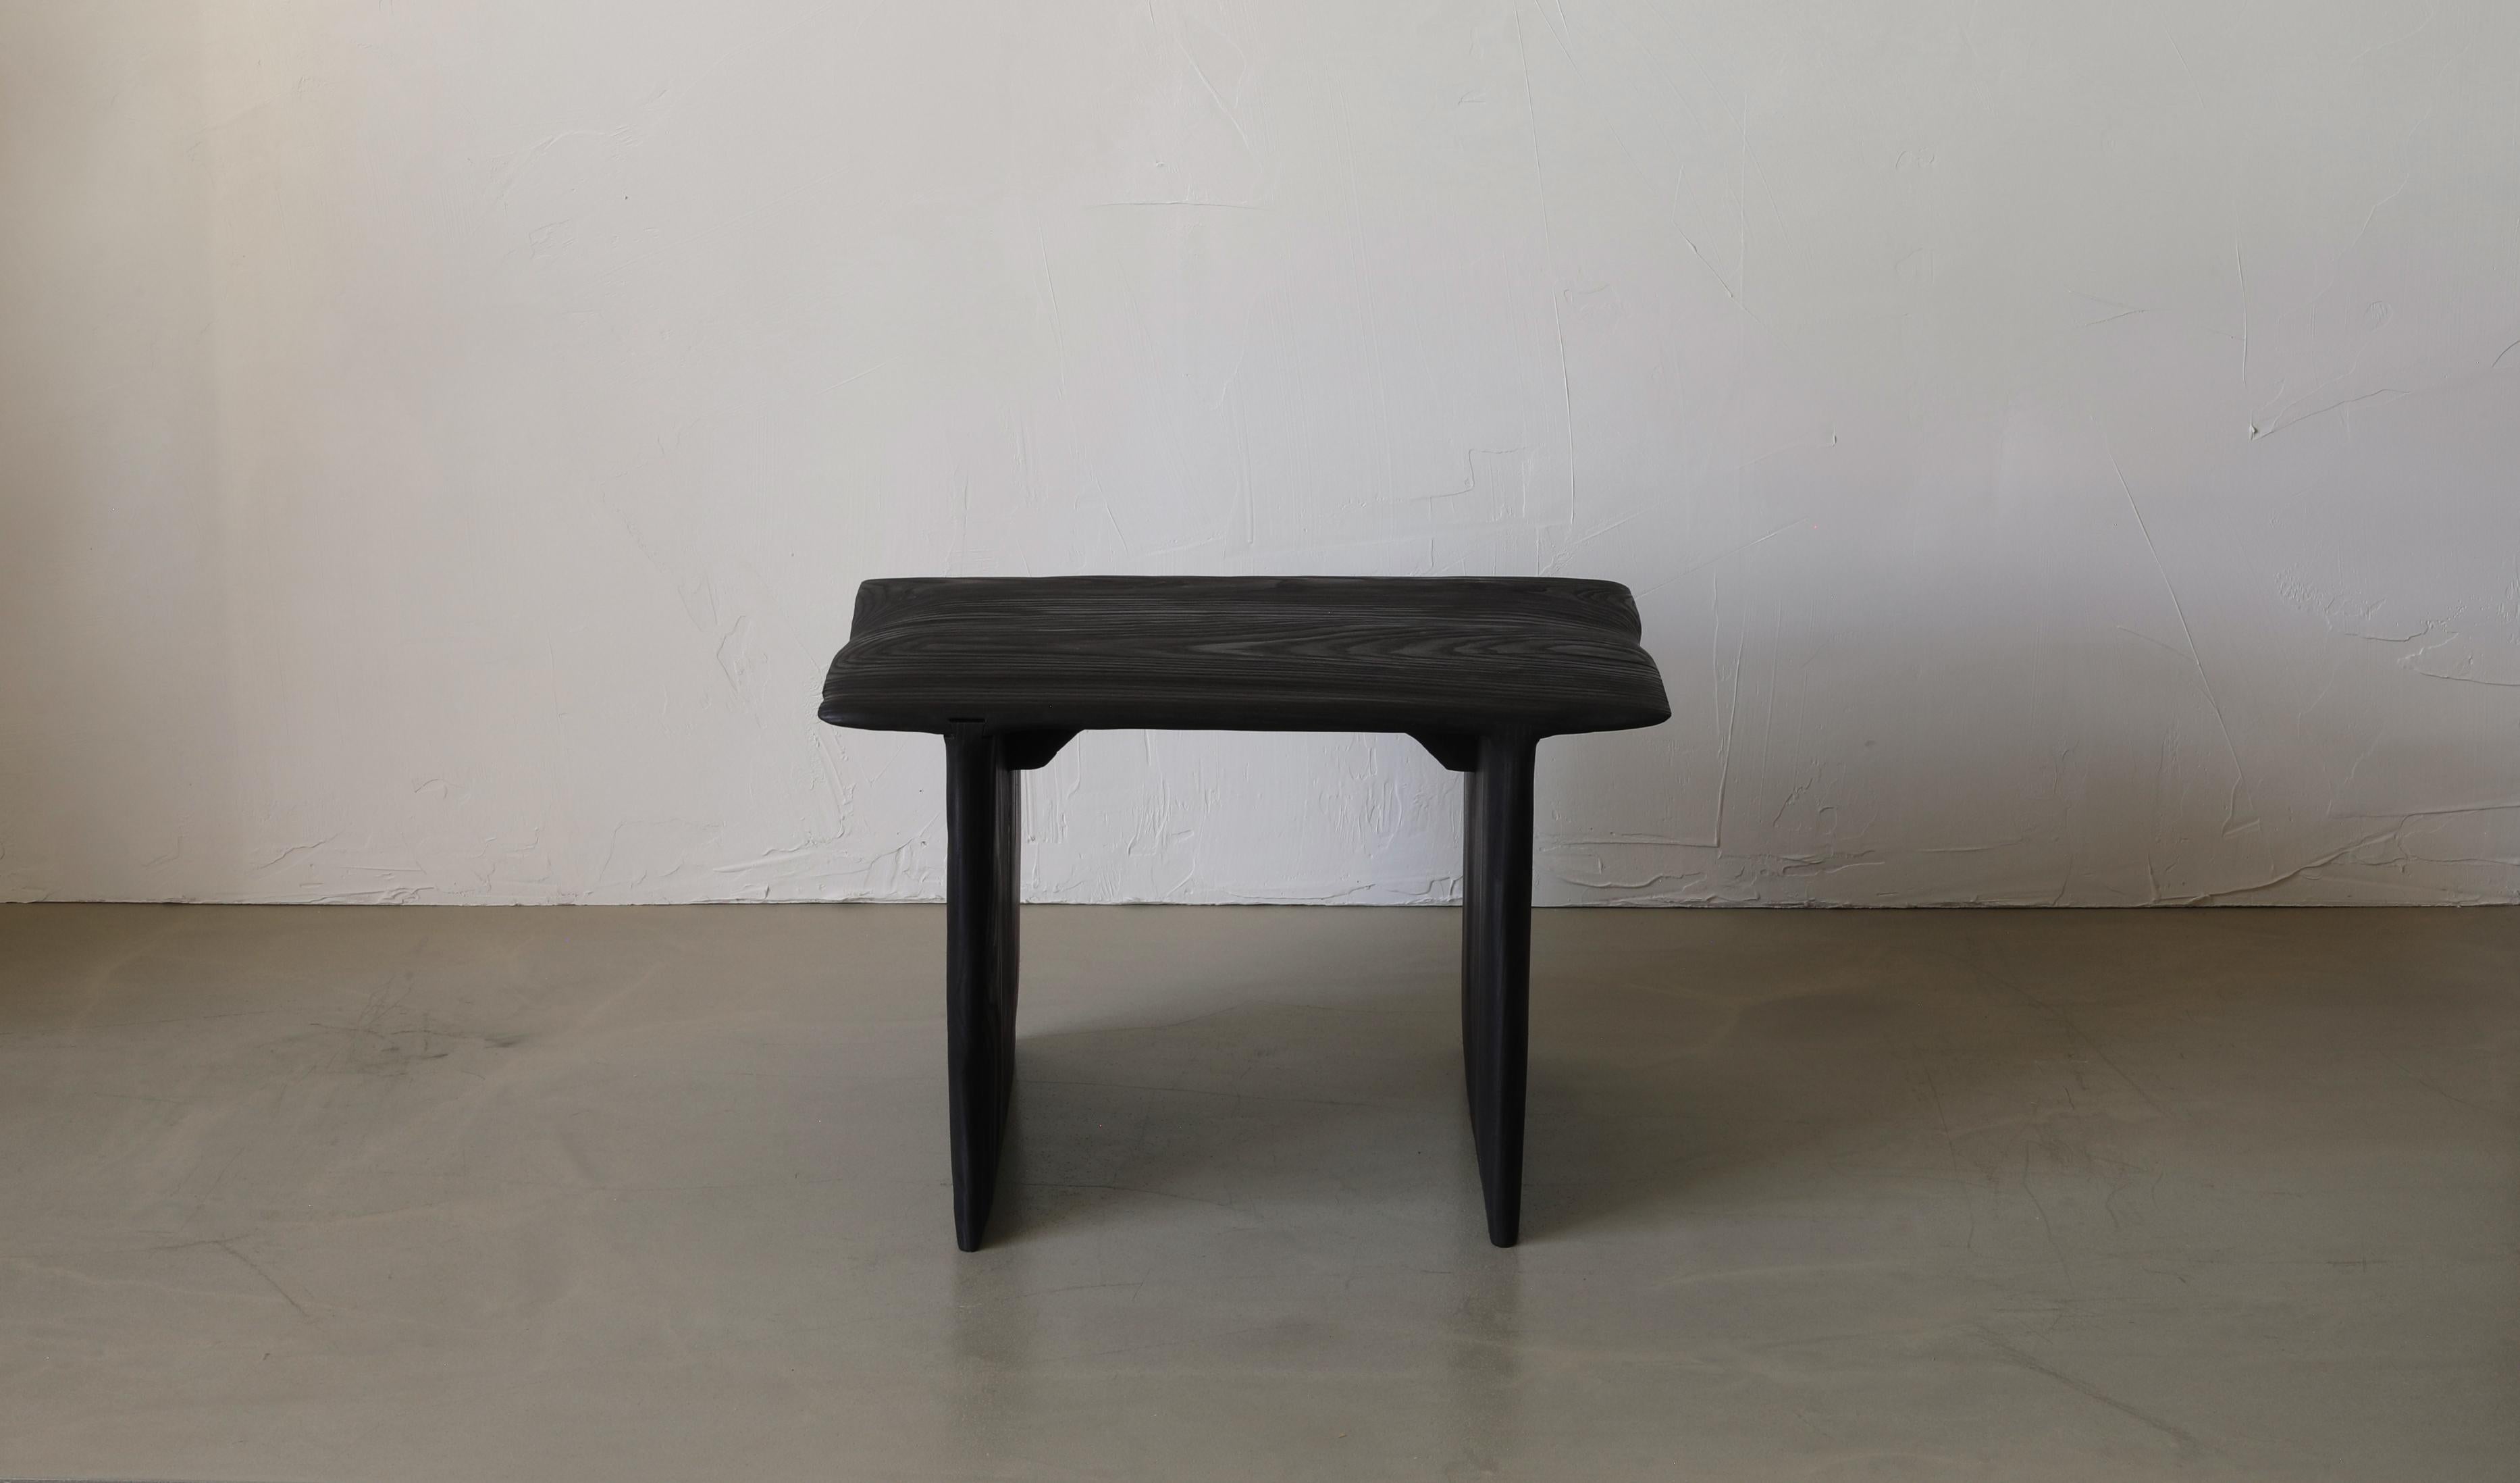 The Figures Stool is 22” long with a 16” deep seat and 16” height. The default top and legs are burnt ash but can be optioned out at additional cost.

FIGURES - This collection can be easily identified by its visually simple profile and its deeply